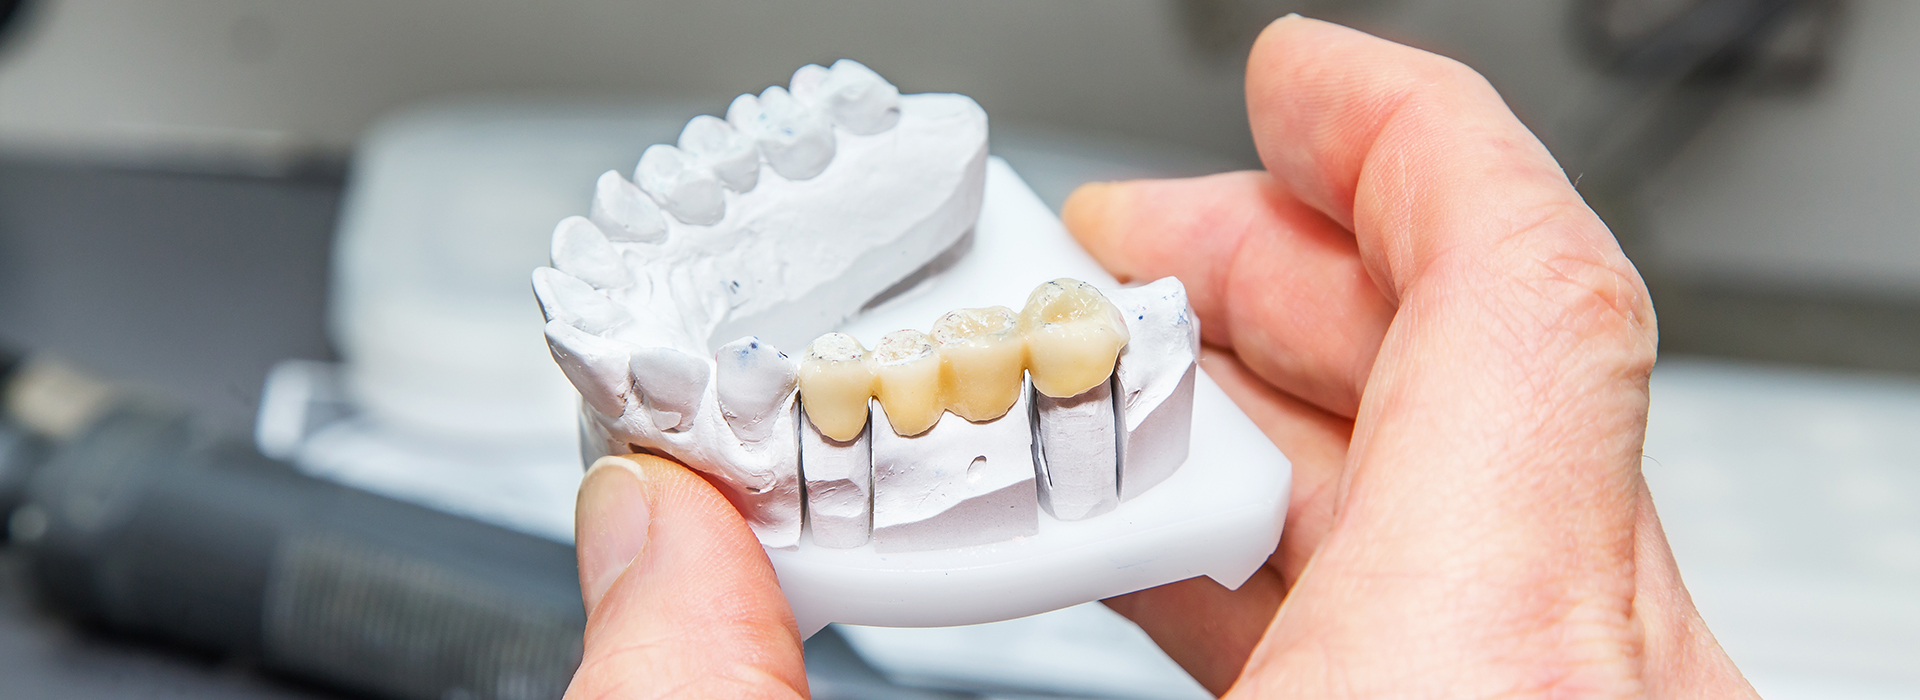 All About Smiles | Root Canals, Dental Fillings and Digital Radiography